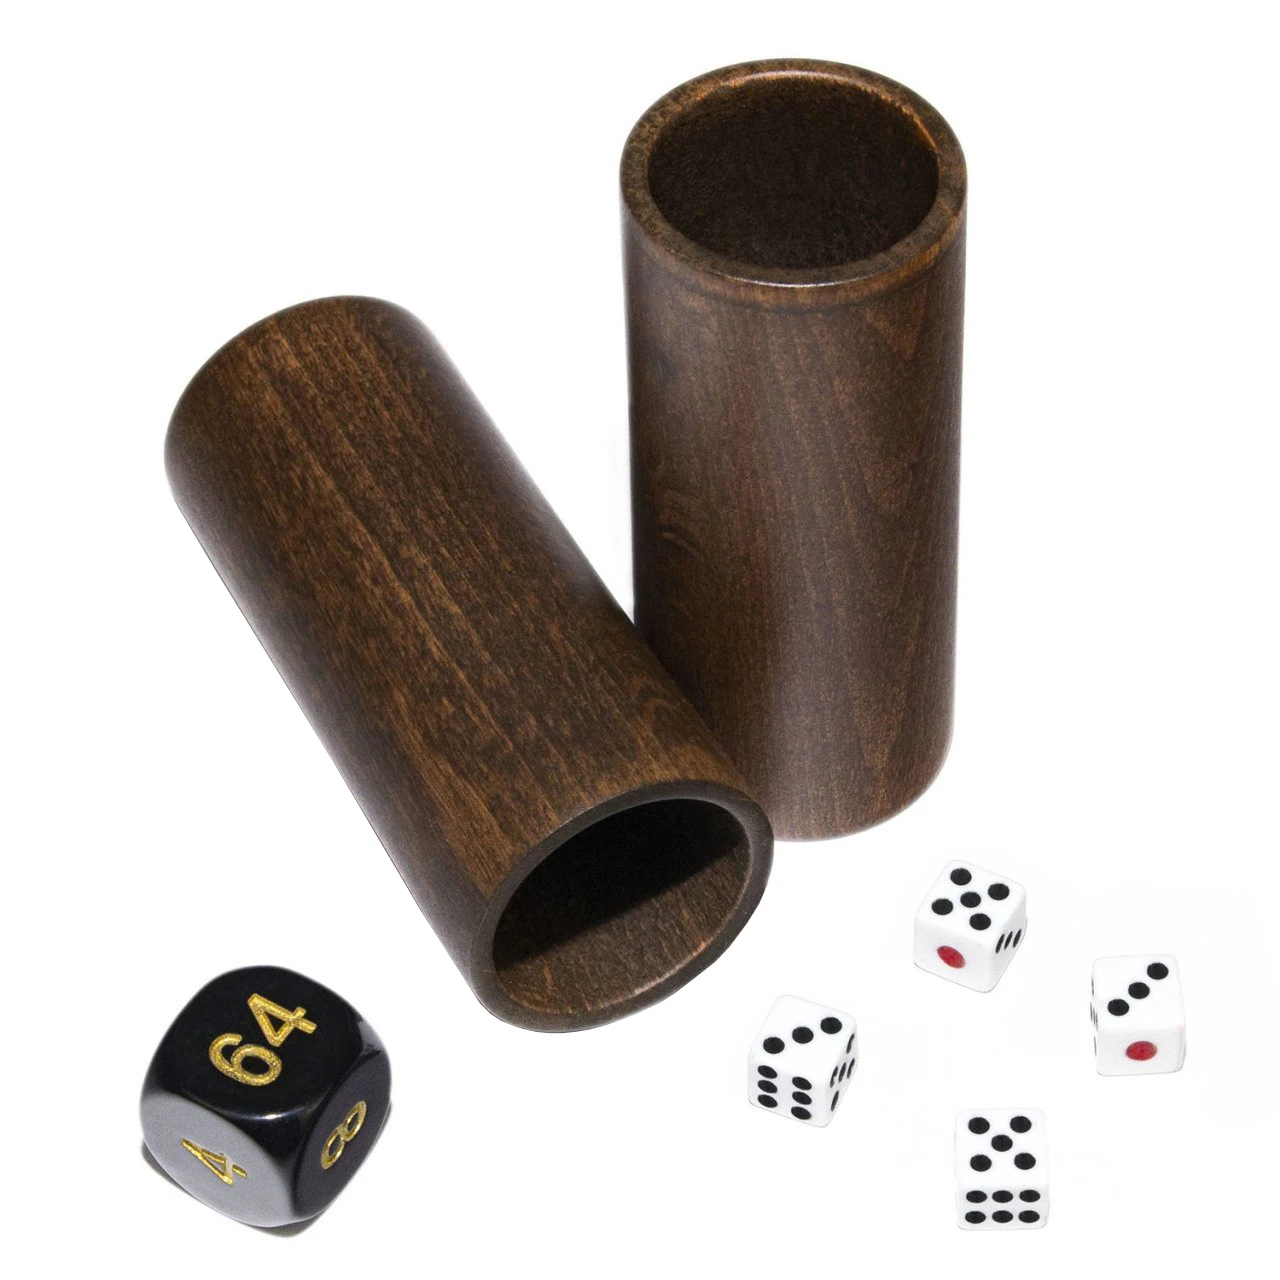 Luxury Solid Walnut Wood Backgammon Board Games Dice Cup Set Pieces - Wooden Cubs For Gift Party Checkers luxury backgammon board game set solid walnut ottoman embroidered